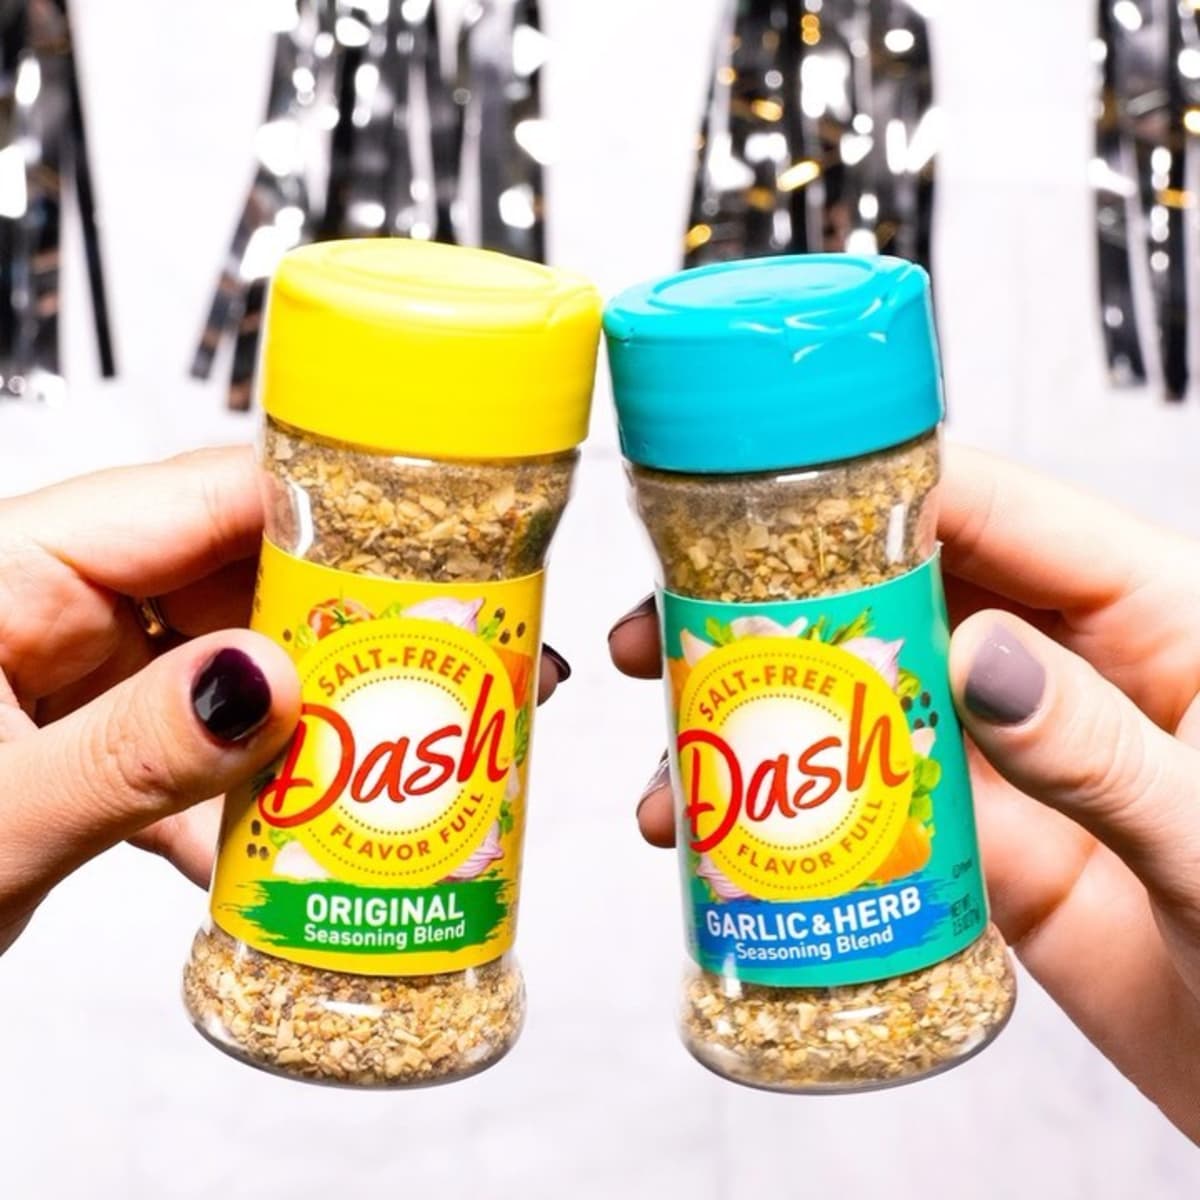 Woman's Funny Realization About 'Mrs. Dash' Seasoning Is Cracking People Up  - Delishably News